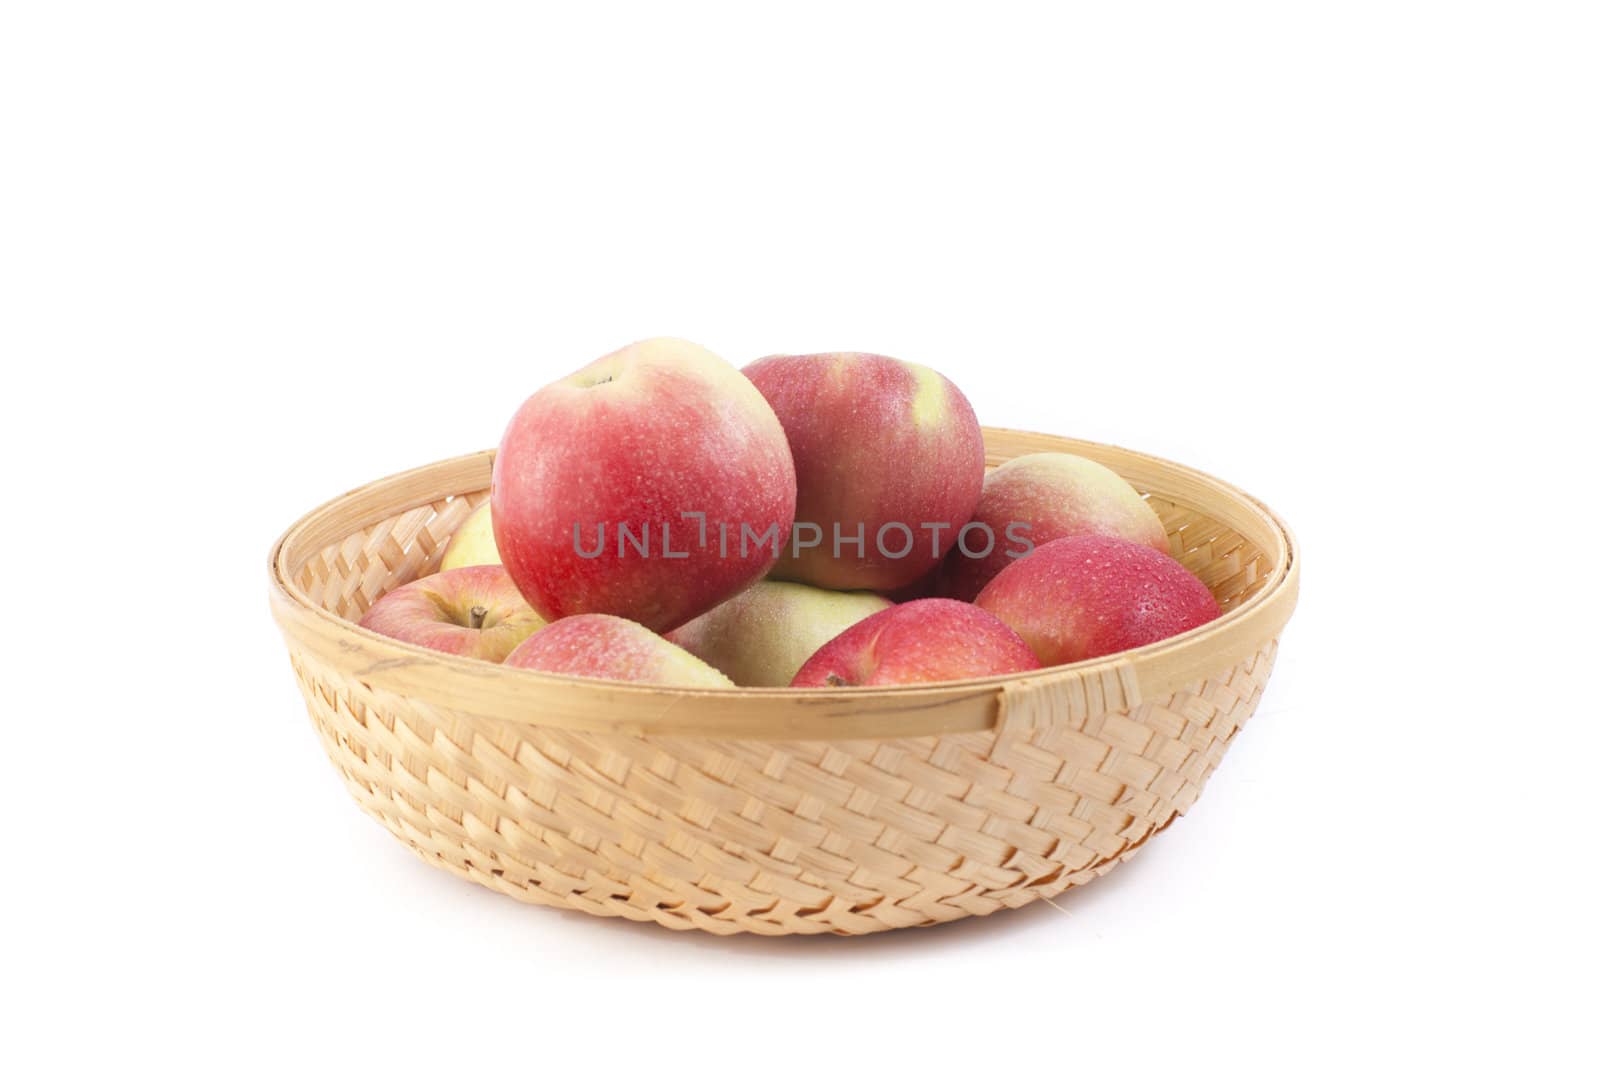 apples are in a basket